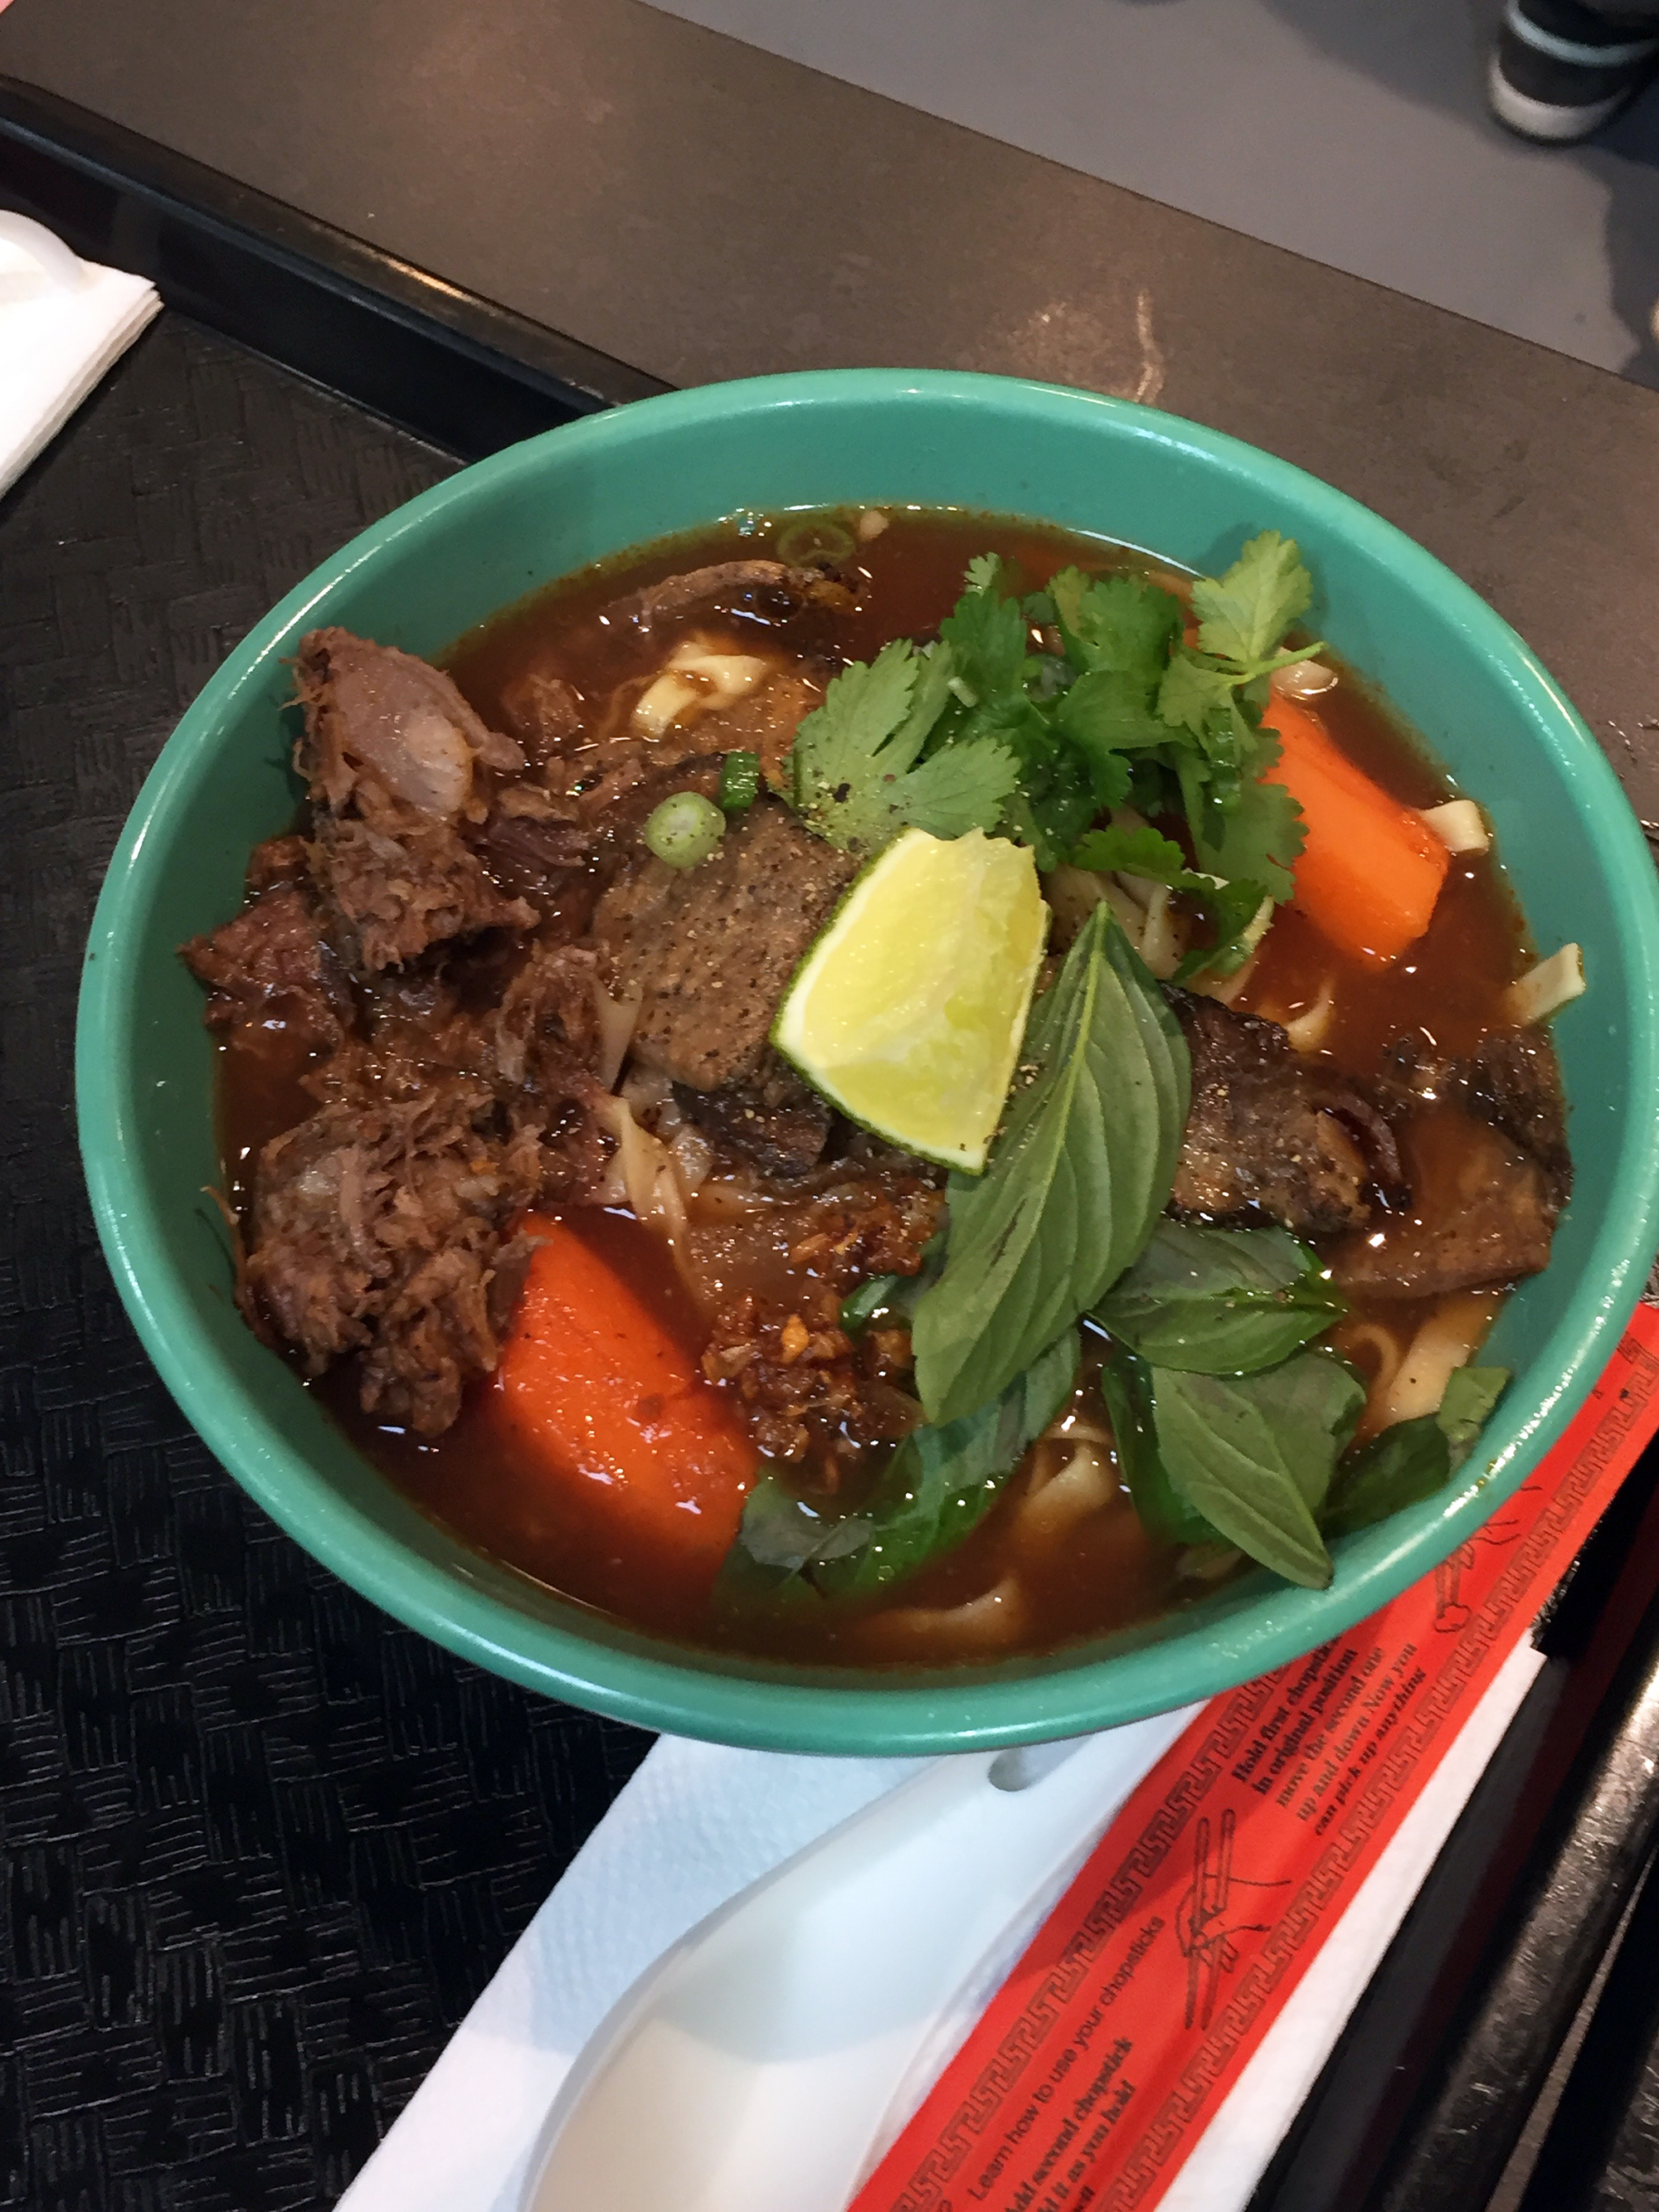 Koh-ko pairs hearty beef broth with egg noodles, braised beef, bok choy, crispy garlic, red onion, and cilantro.